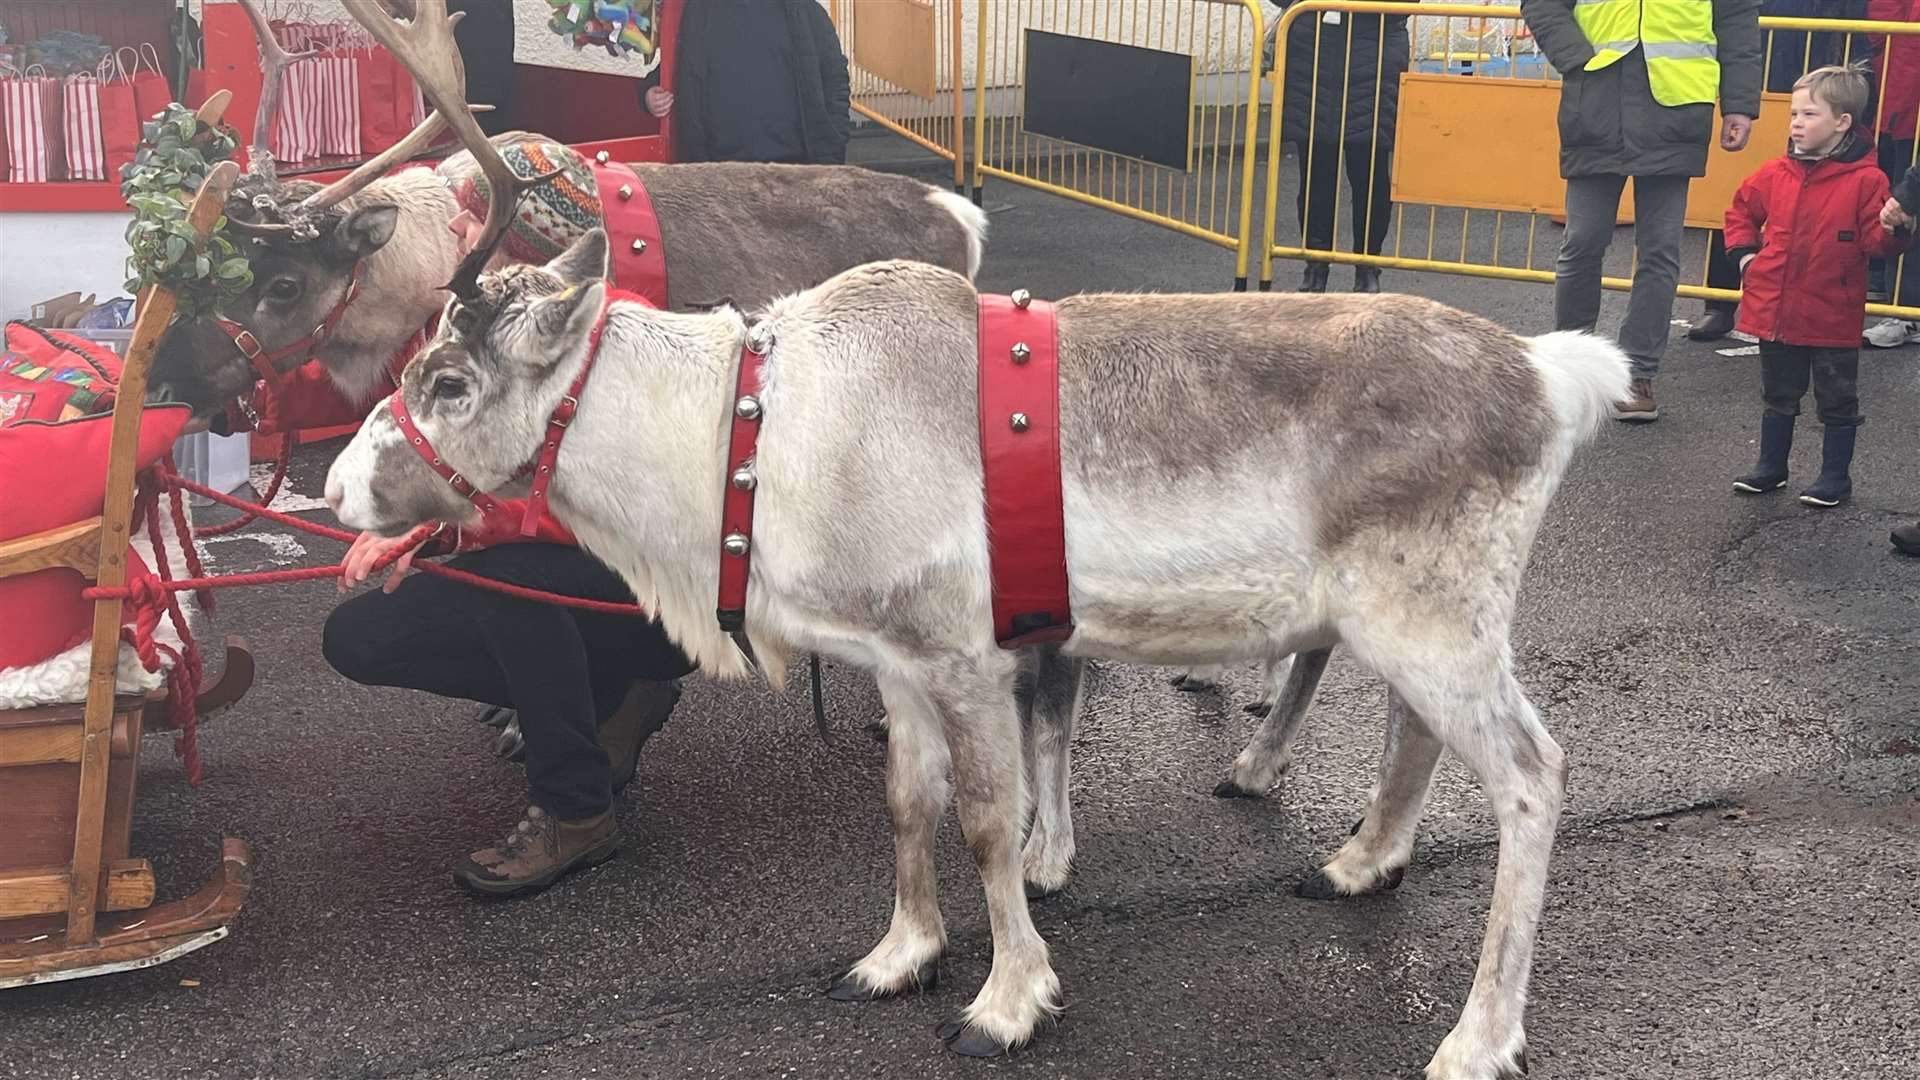 The reindeer are a star attraction at Lairg Winterfest.